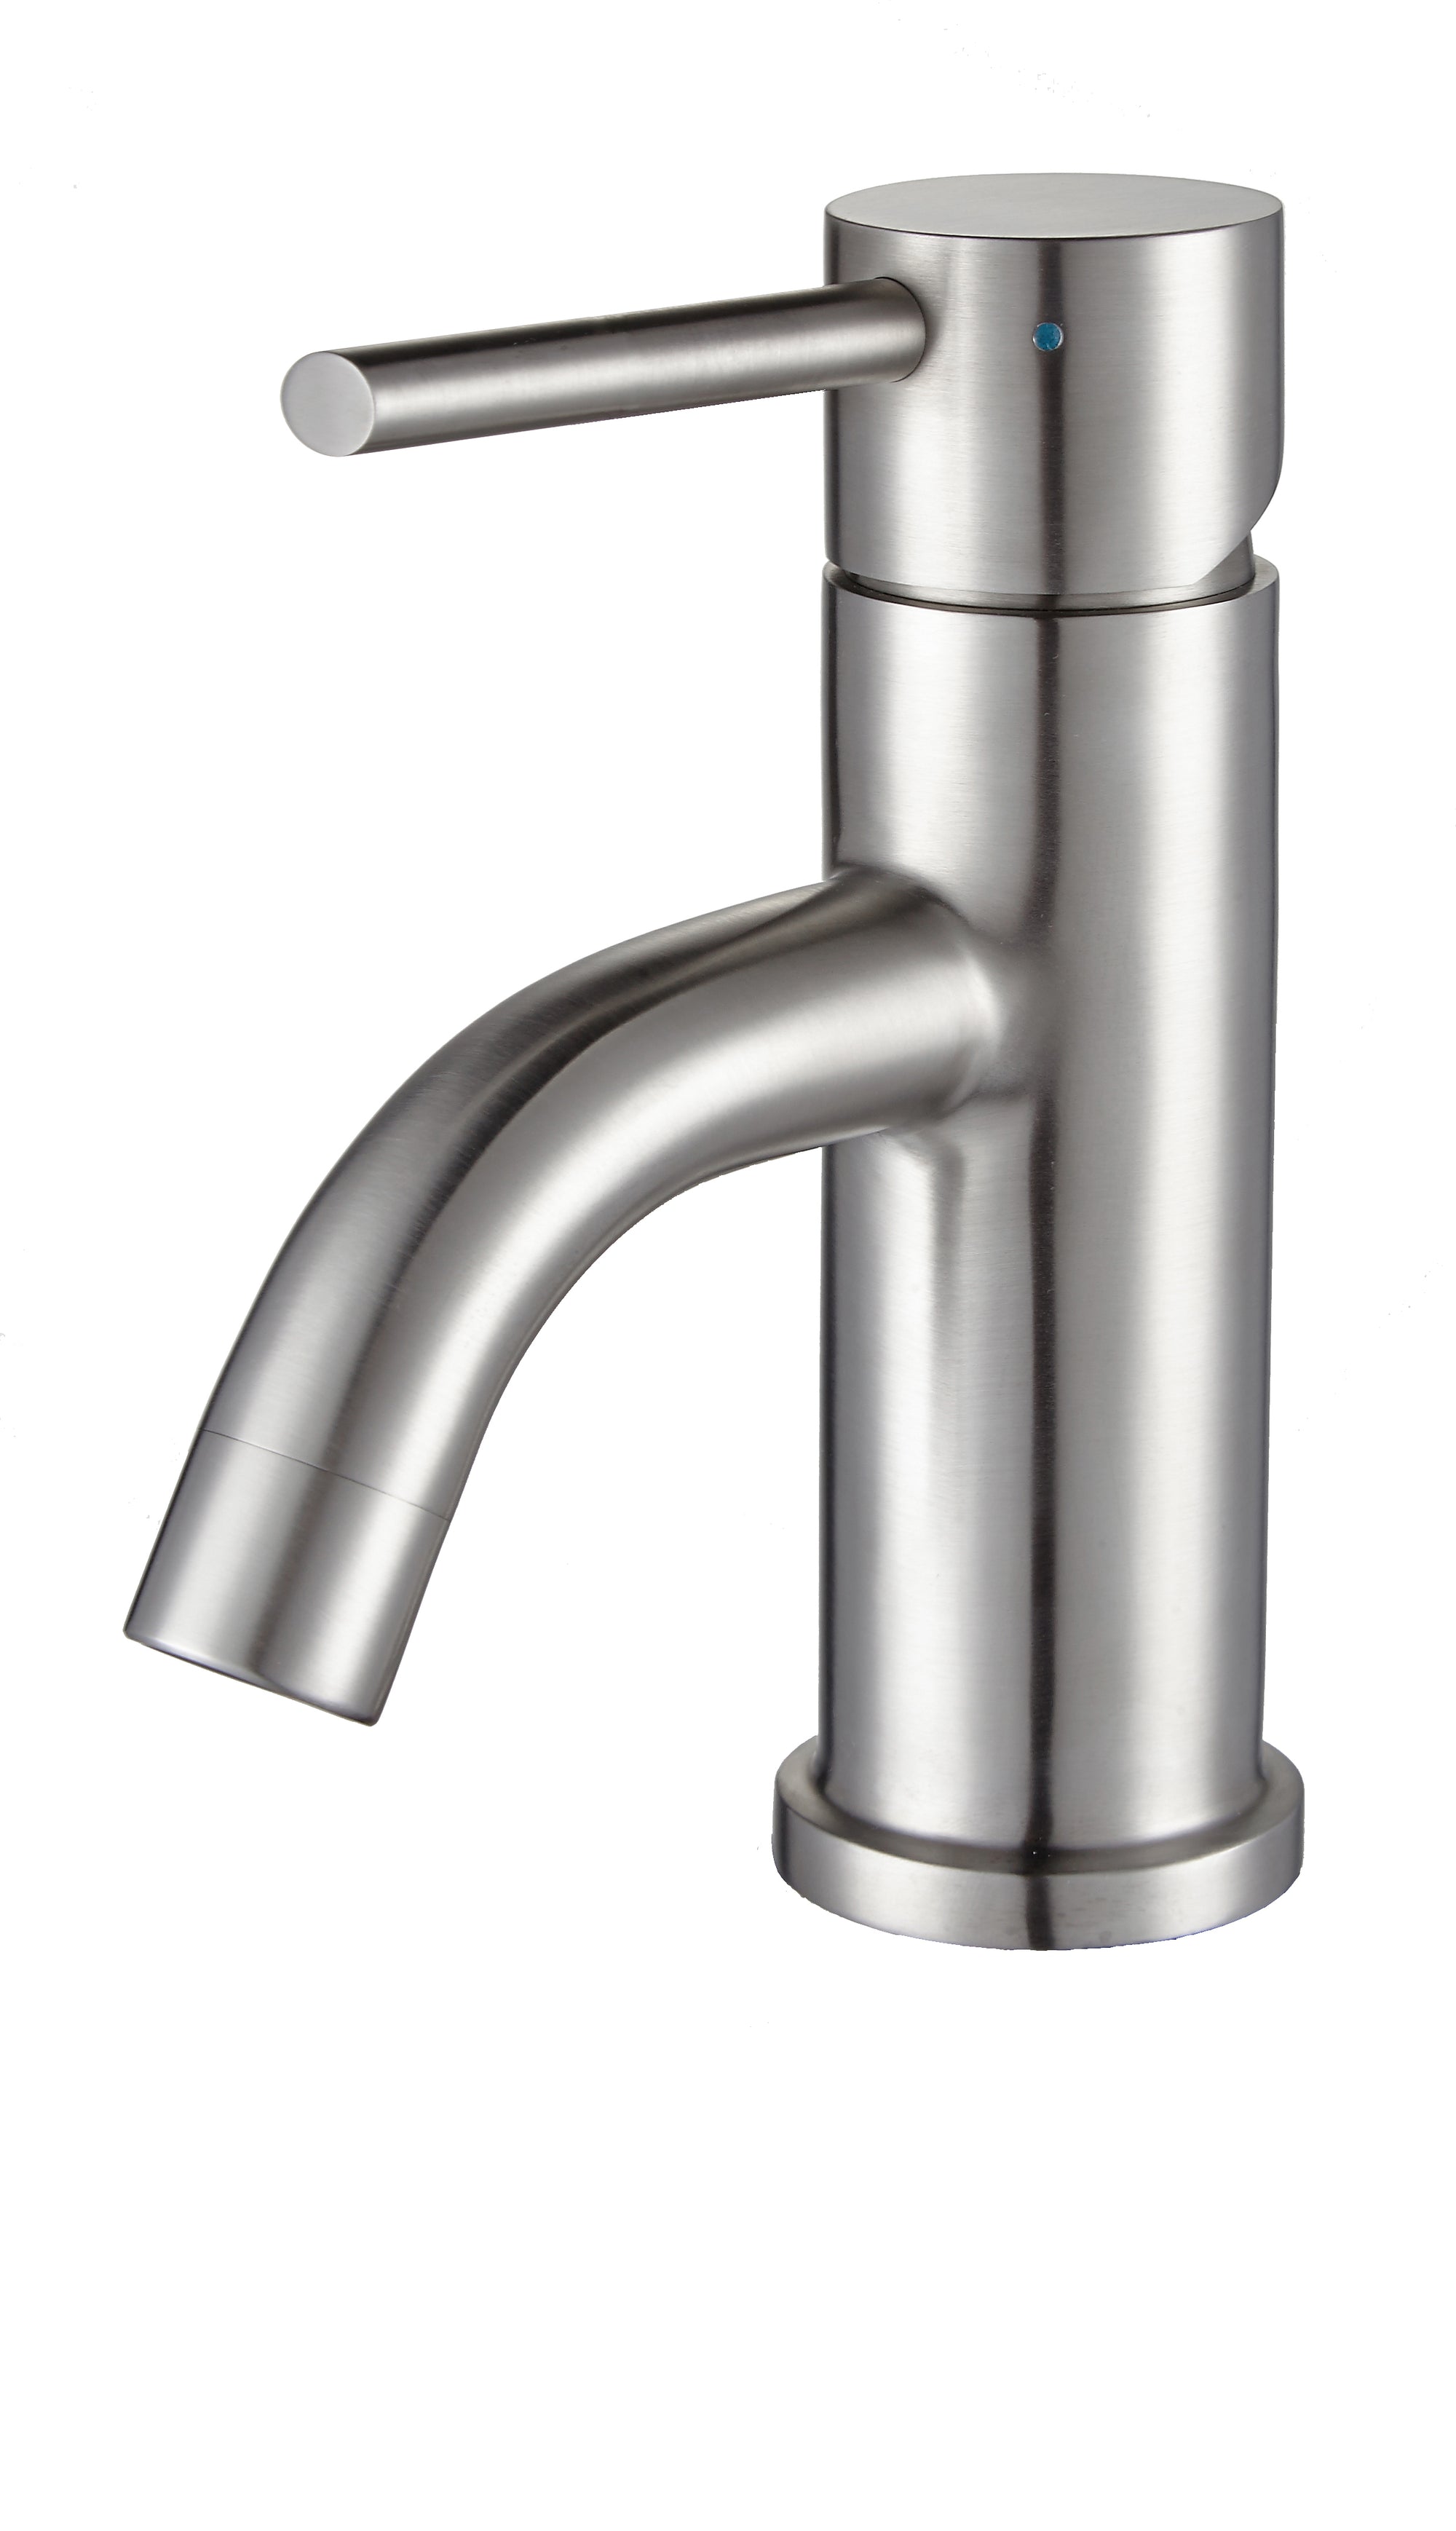 Waterhaus Solid Stainless Steel, Single Hole, Single Lever Lavatory Faucet with Matching Pop-up Waste